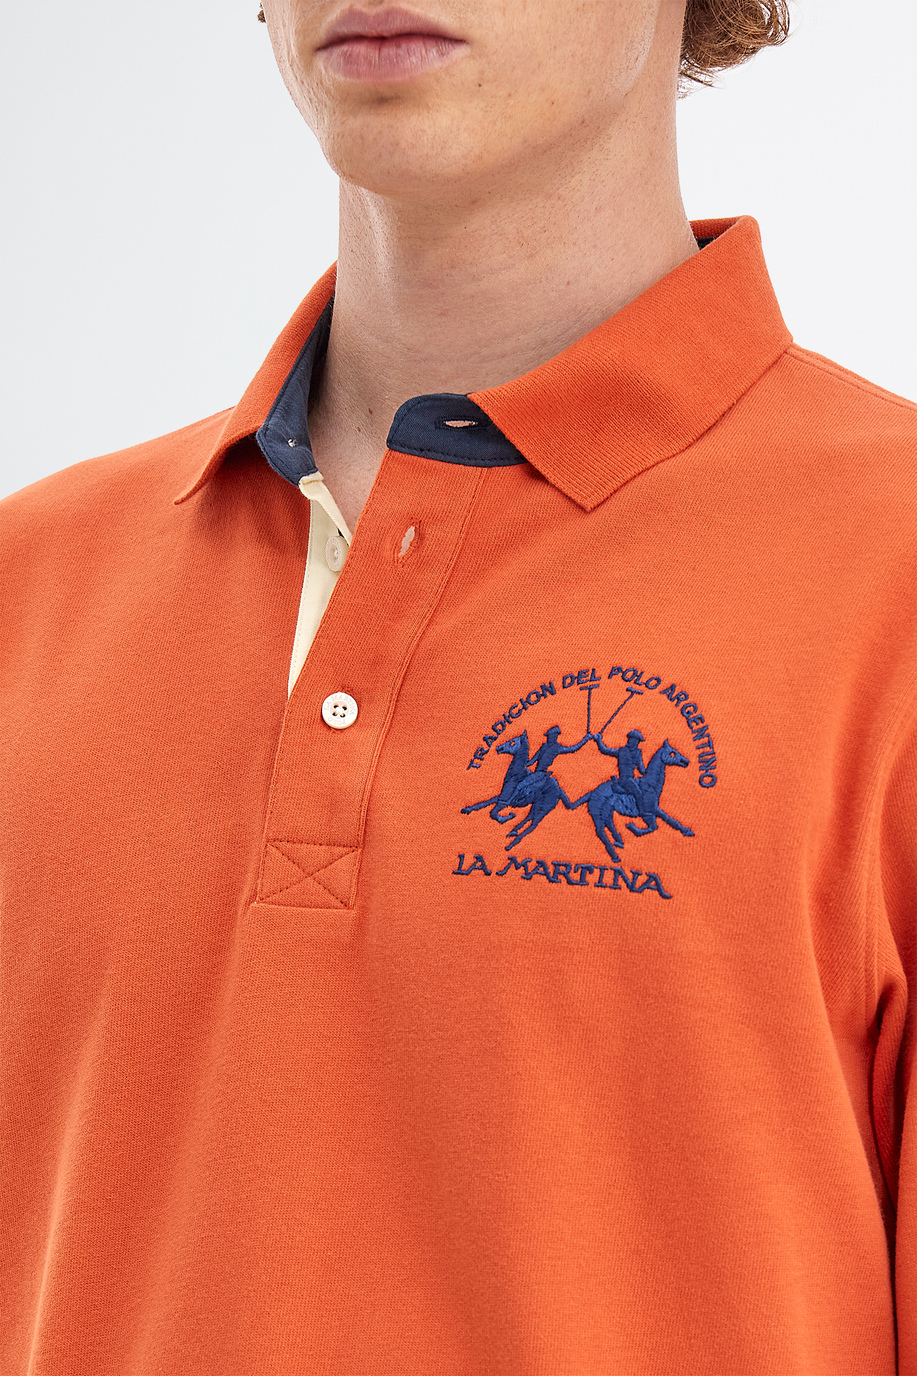 Men’s polo shirt in cotton jersey long sleeves slim fit - Polo Shirts | La Martina - Official Online Shop